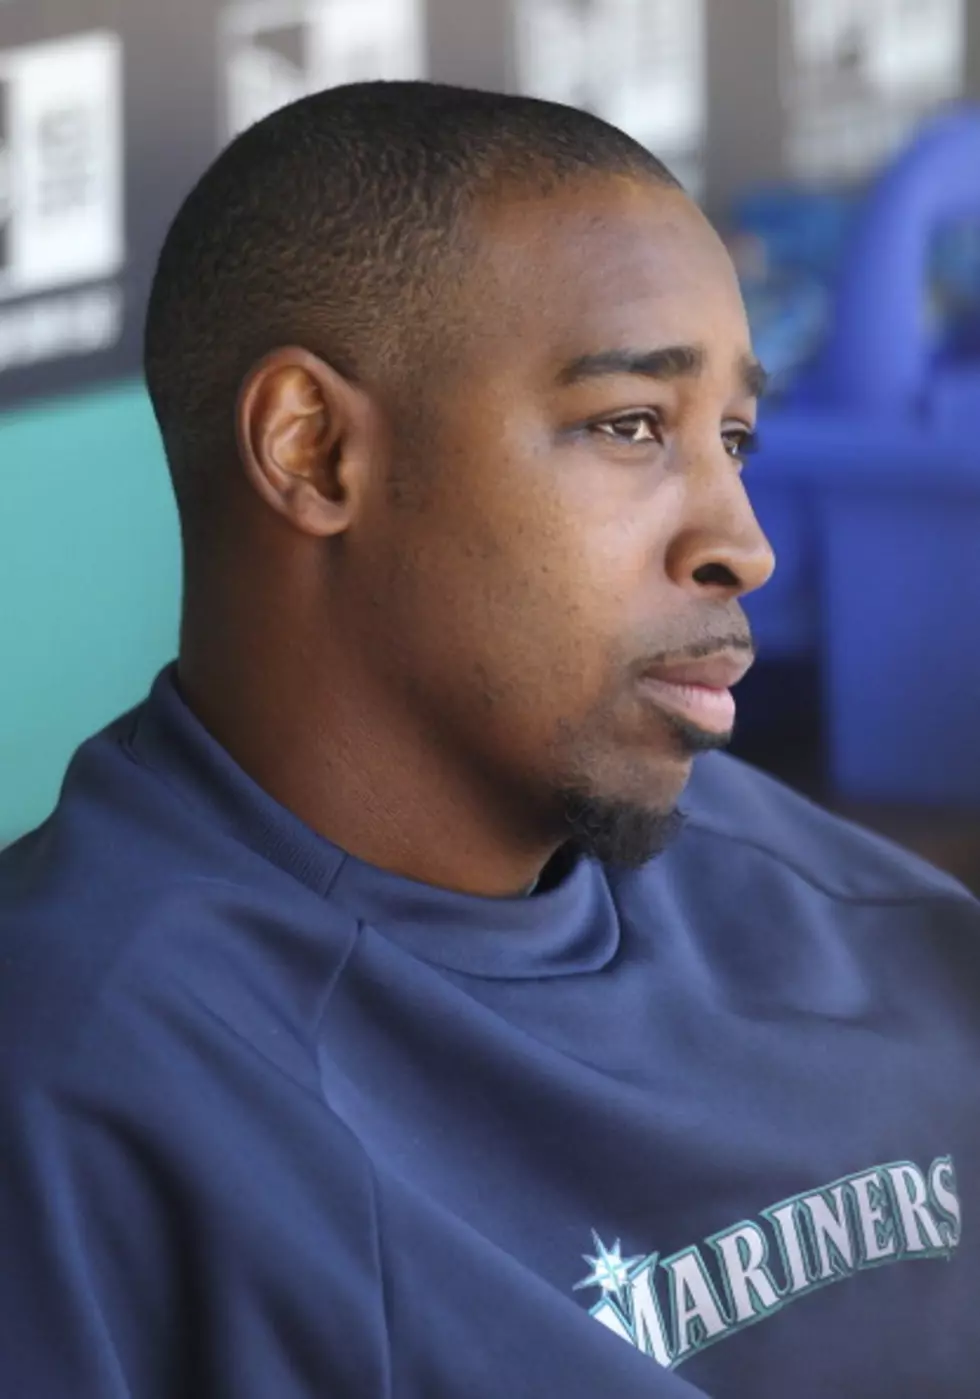 Mariners’ Figgins: ‘I Can’t Take Two More Years of This’